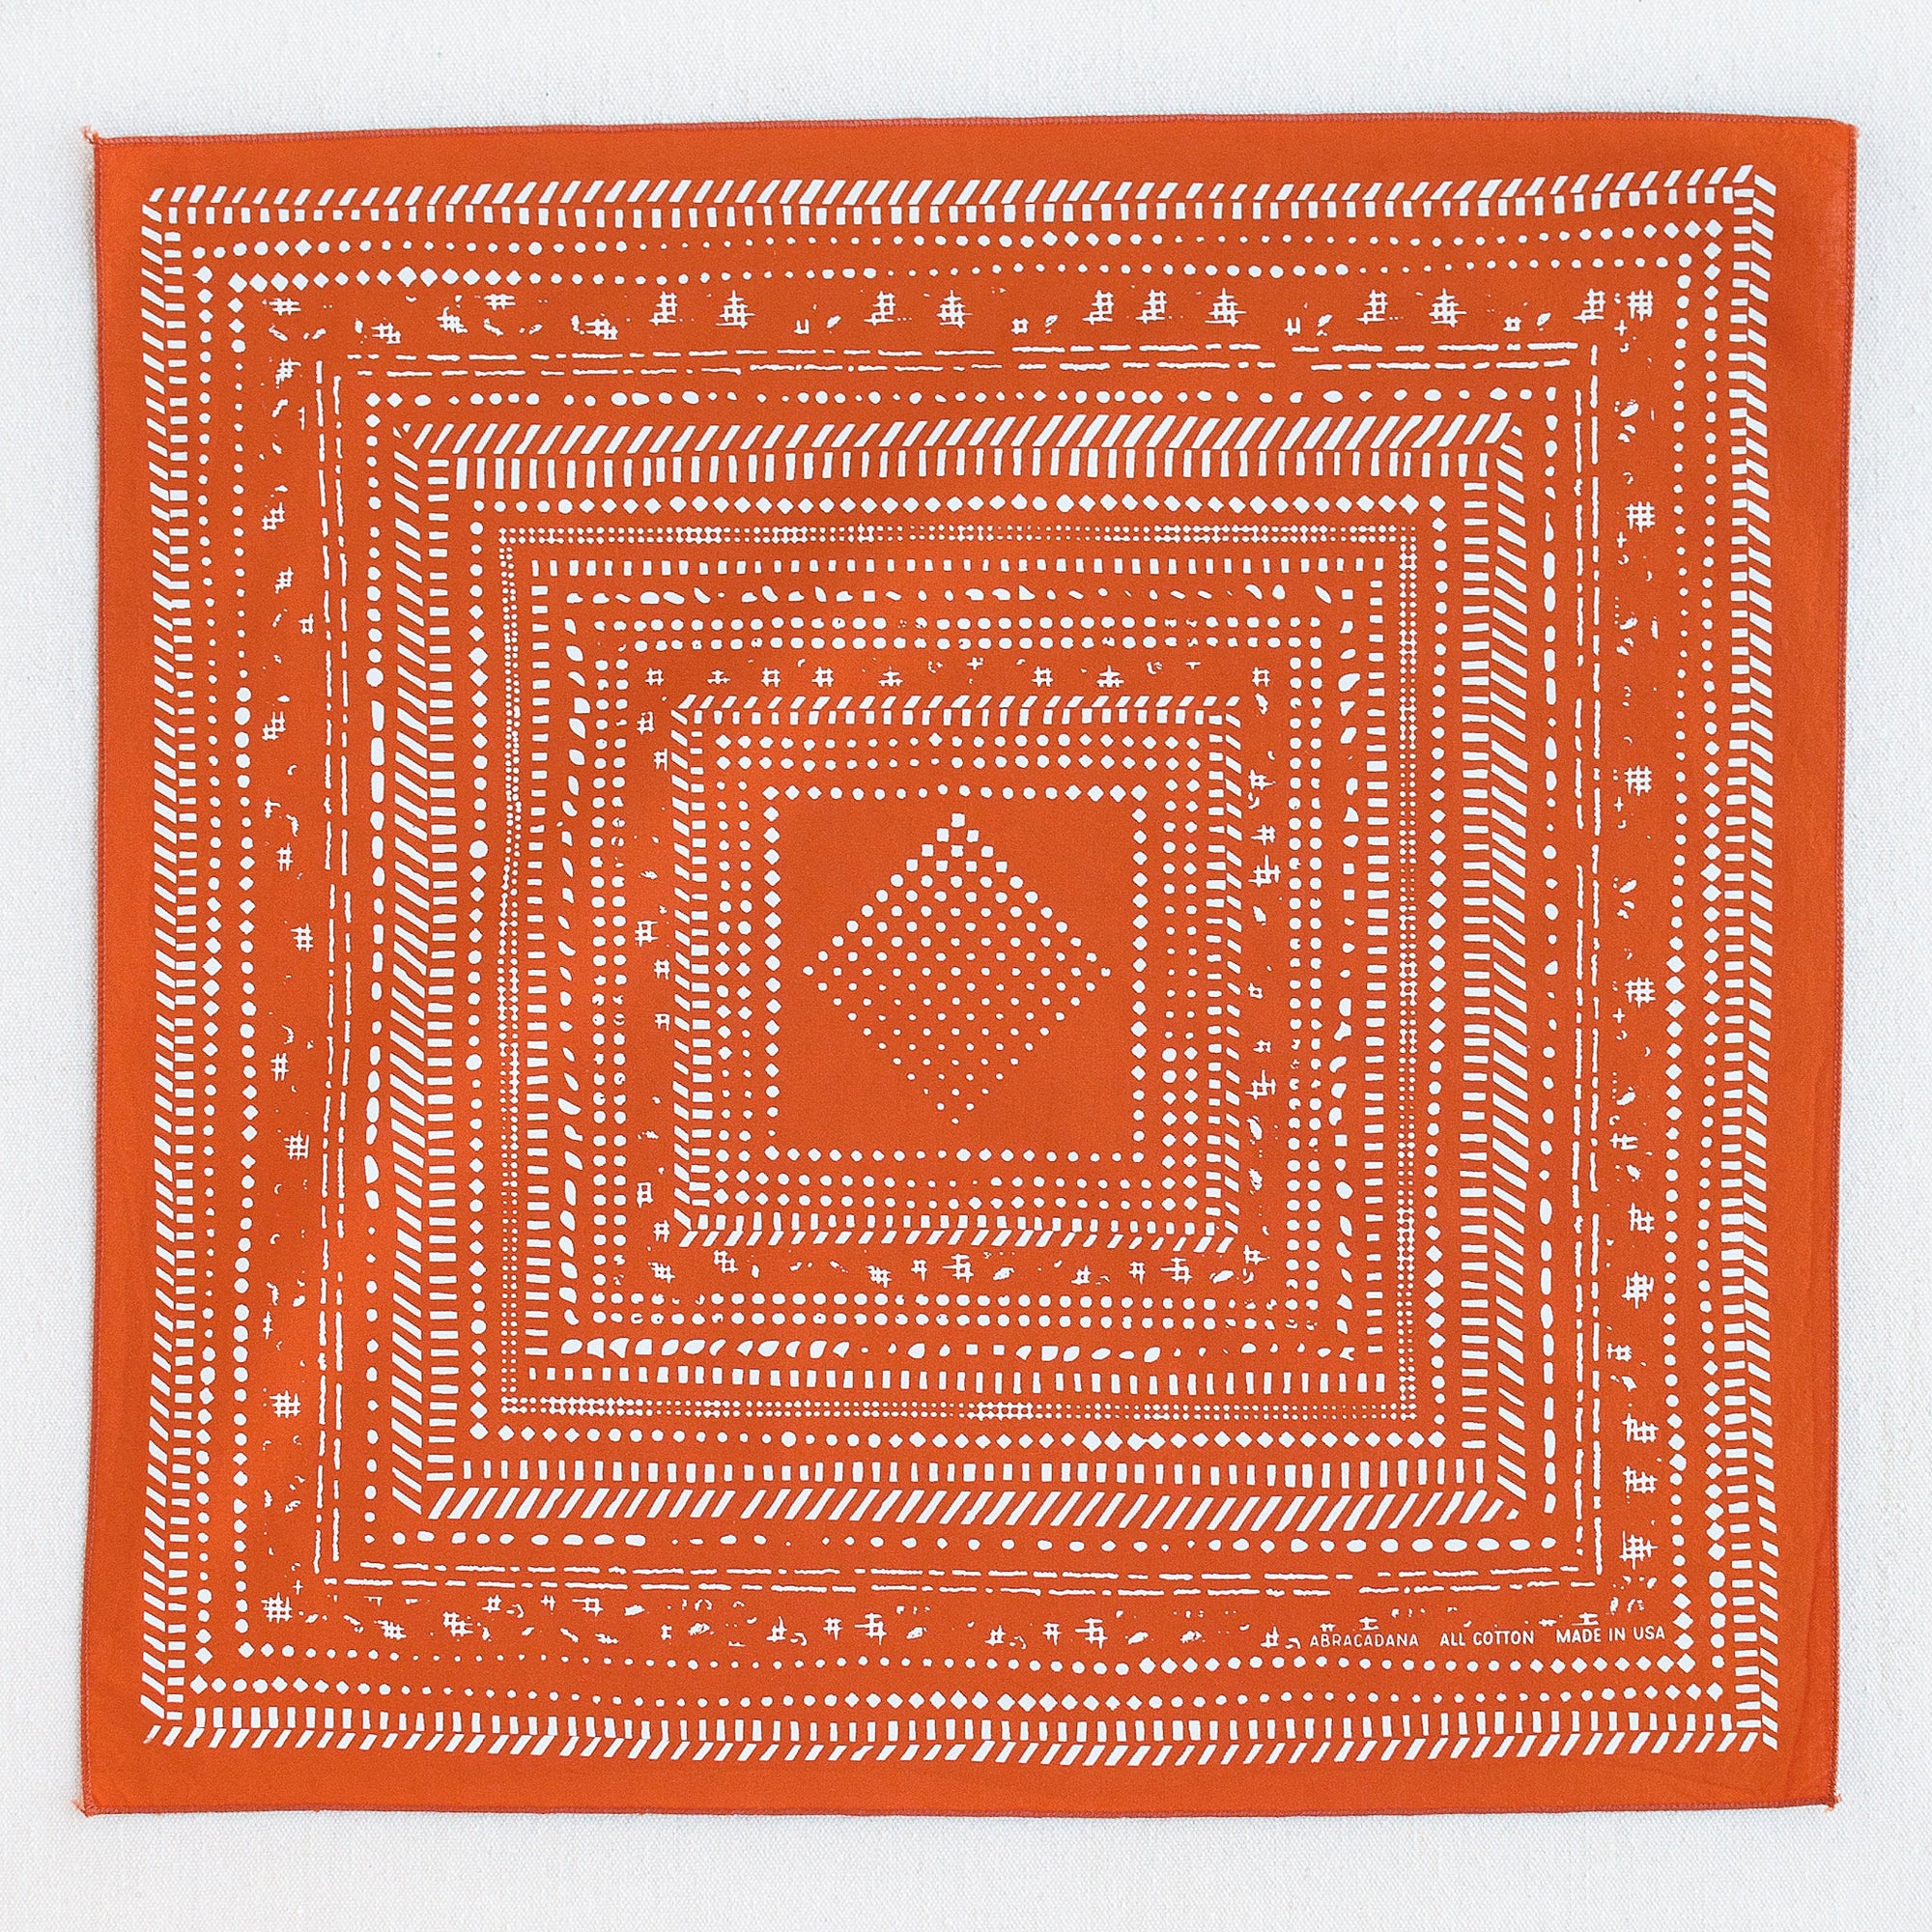 Burnt orange bandana with white print. Pattern loosely arranged squares within squares. Beginning small in the center and extending to the edge.